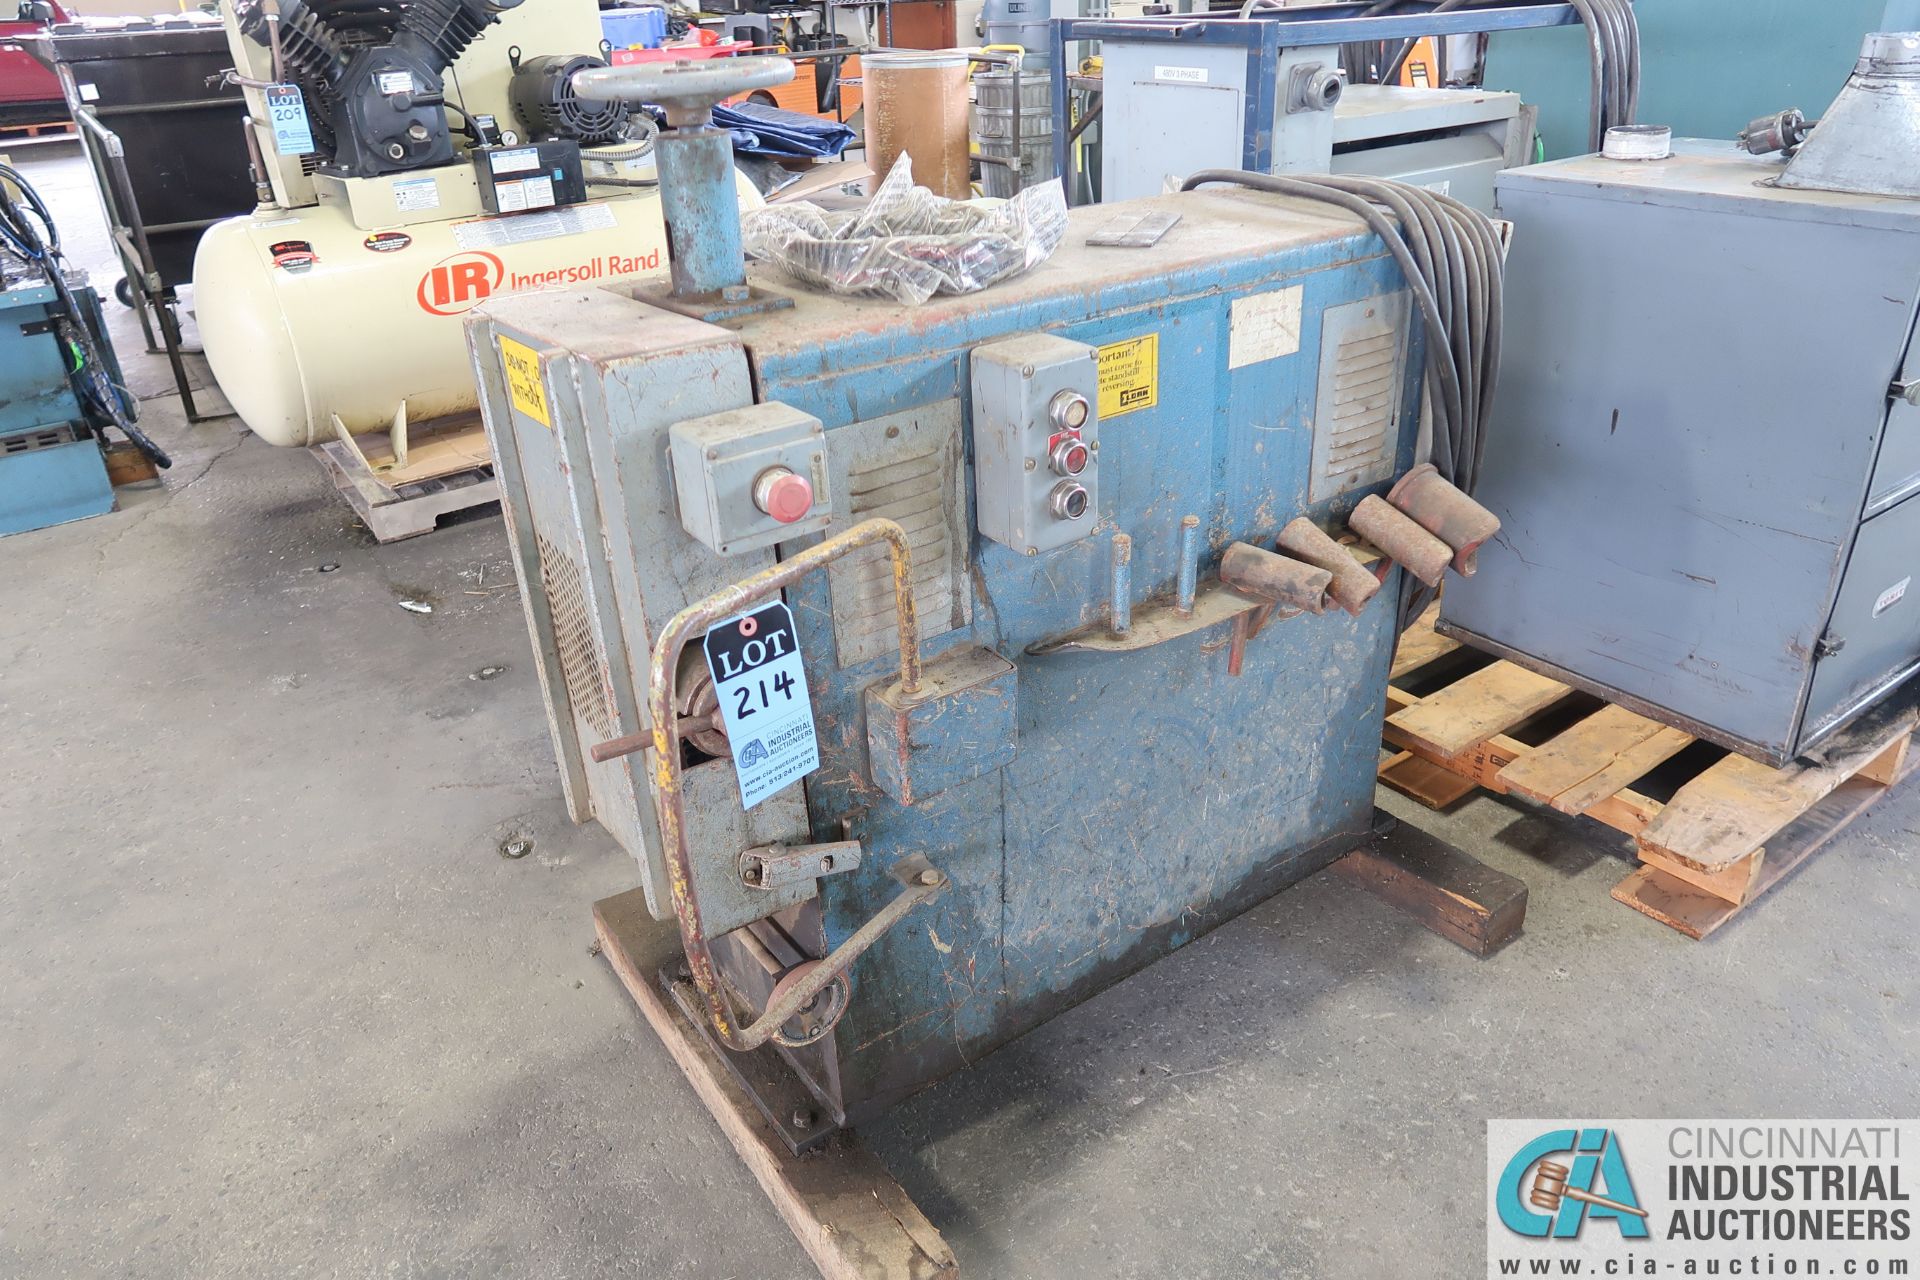 ELAURSEN MODEL M3 WIRE STRIPPING MACHINE; FAB #635014, 3-PHASE, 220/440 VOLTS **LOCATED AT 110